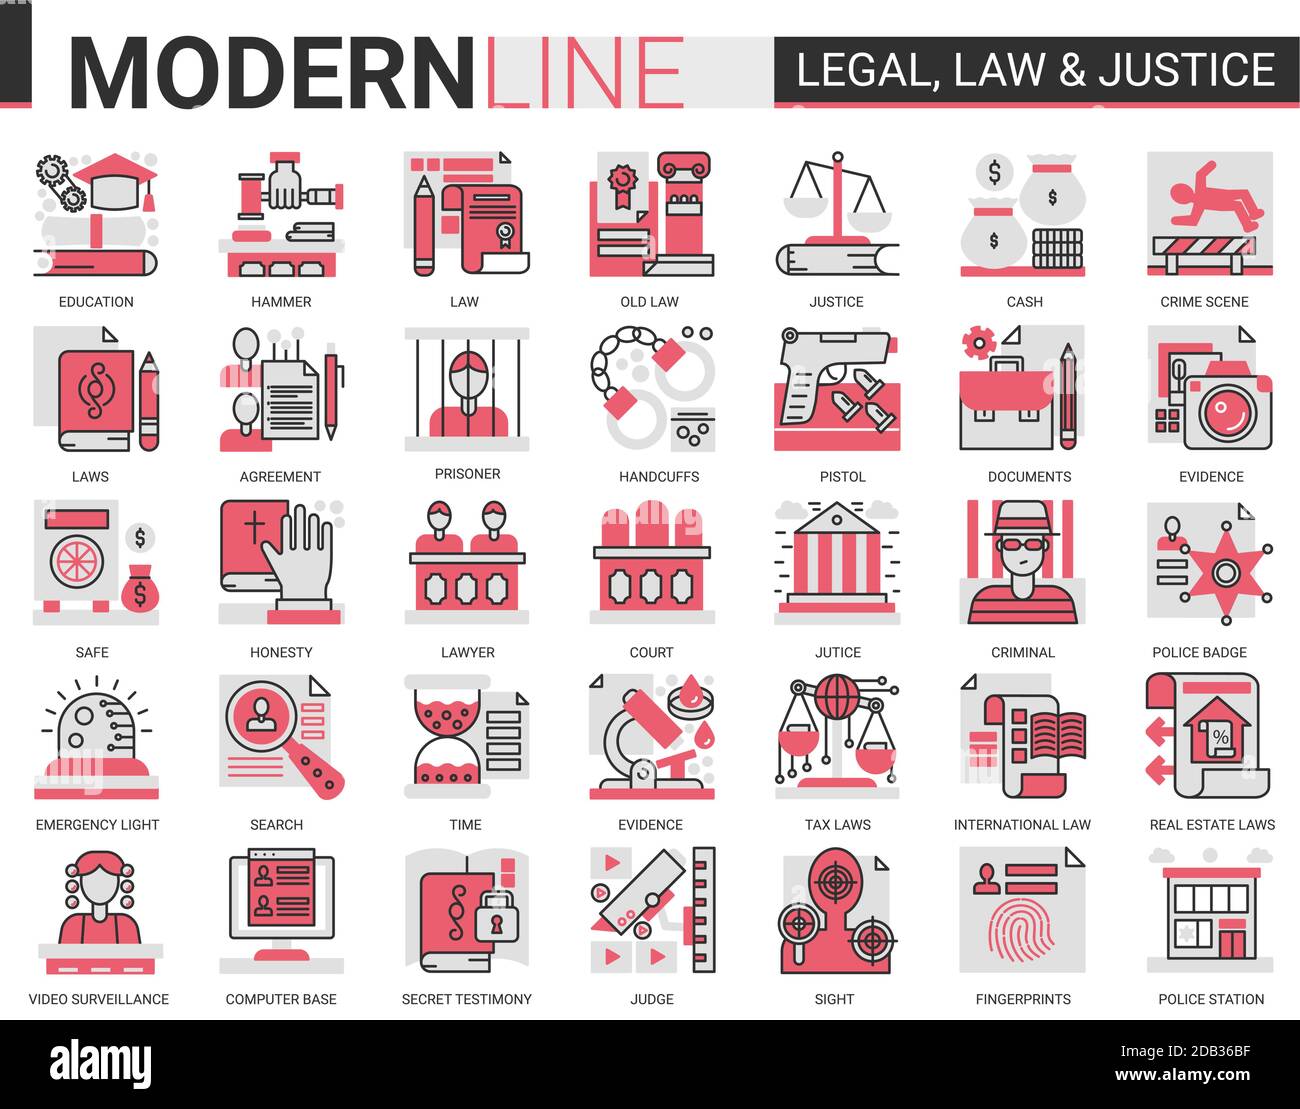 Legal law and justice complex concept flat line icon vector set. Red black infographic design of mobile app website symbols with judicial legislation education, lawyer defense, police investigation Stock Vector